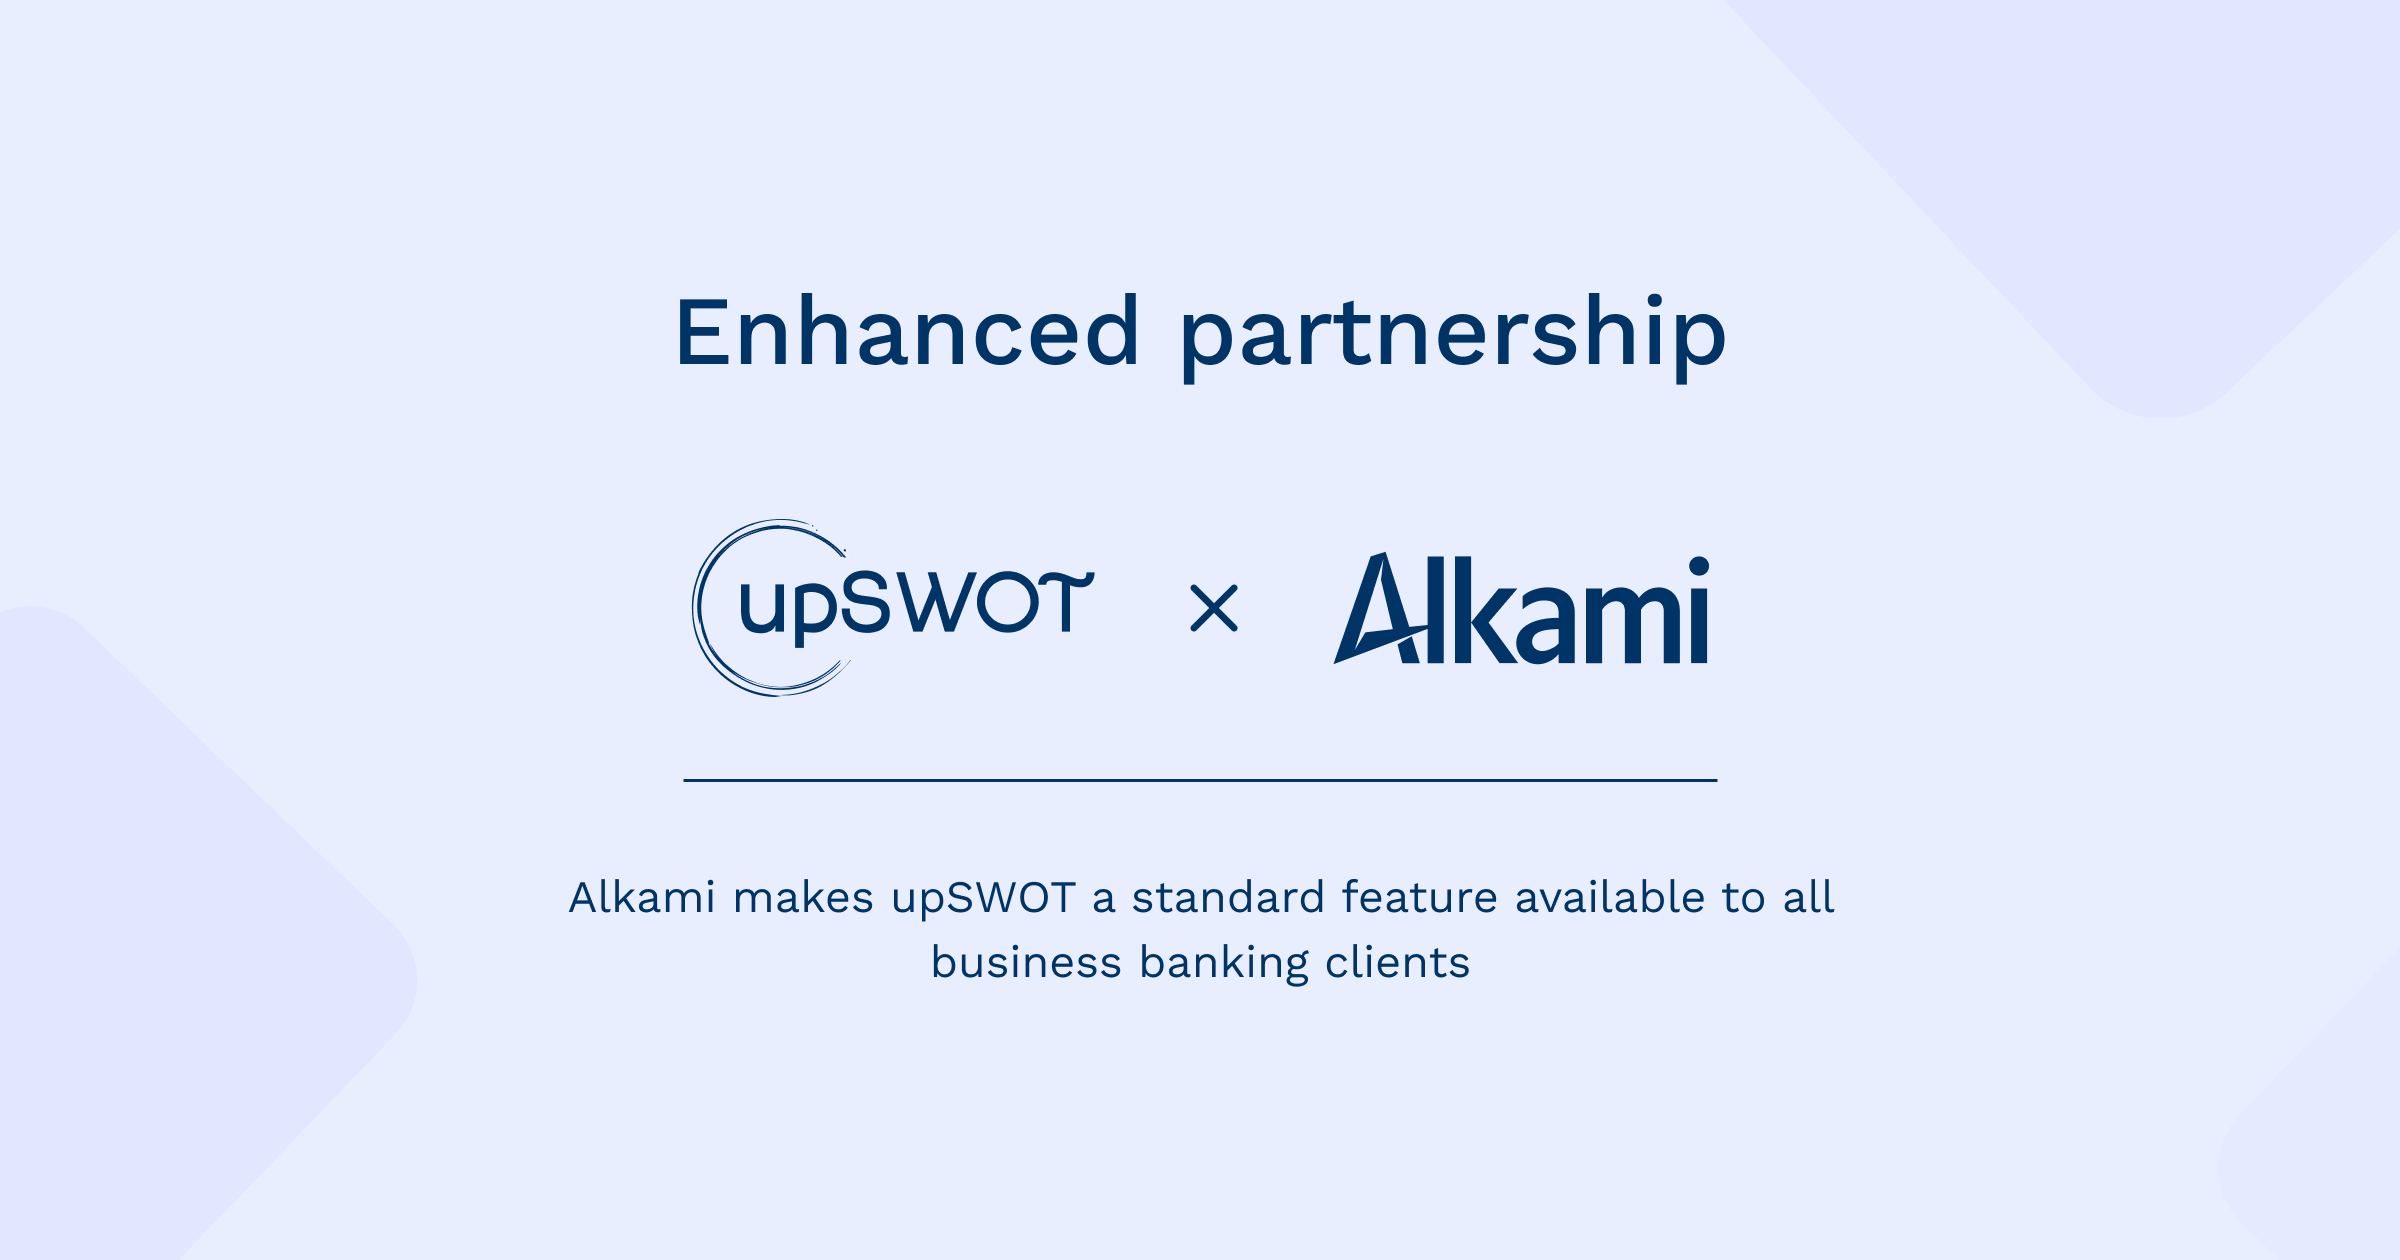 Alkami makes upSWOT a standard feature available to all business banking clients